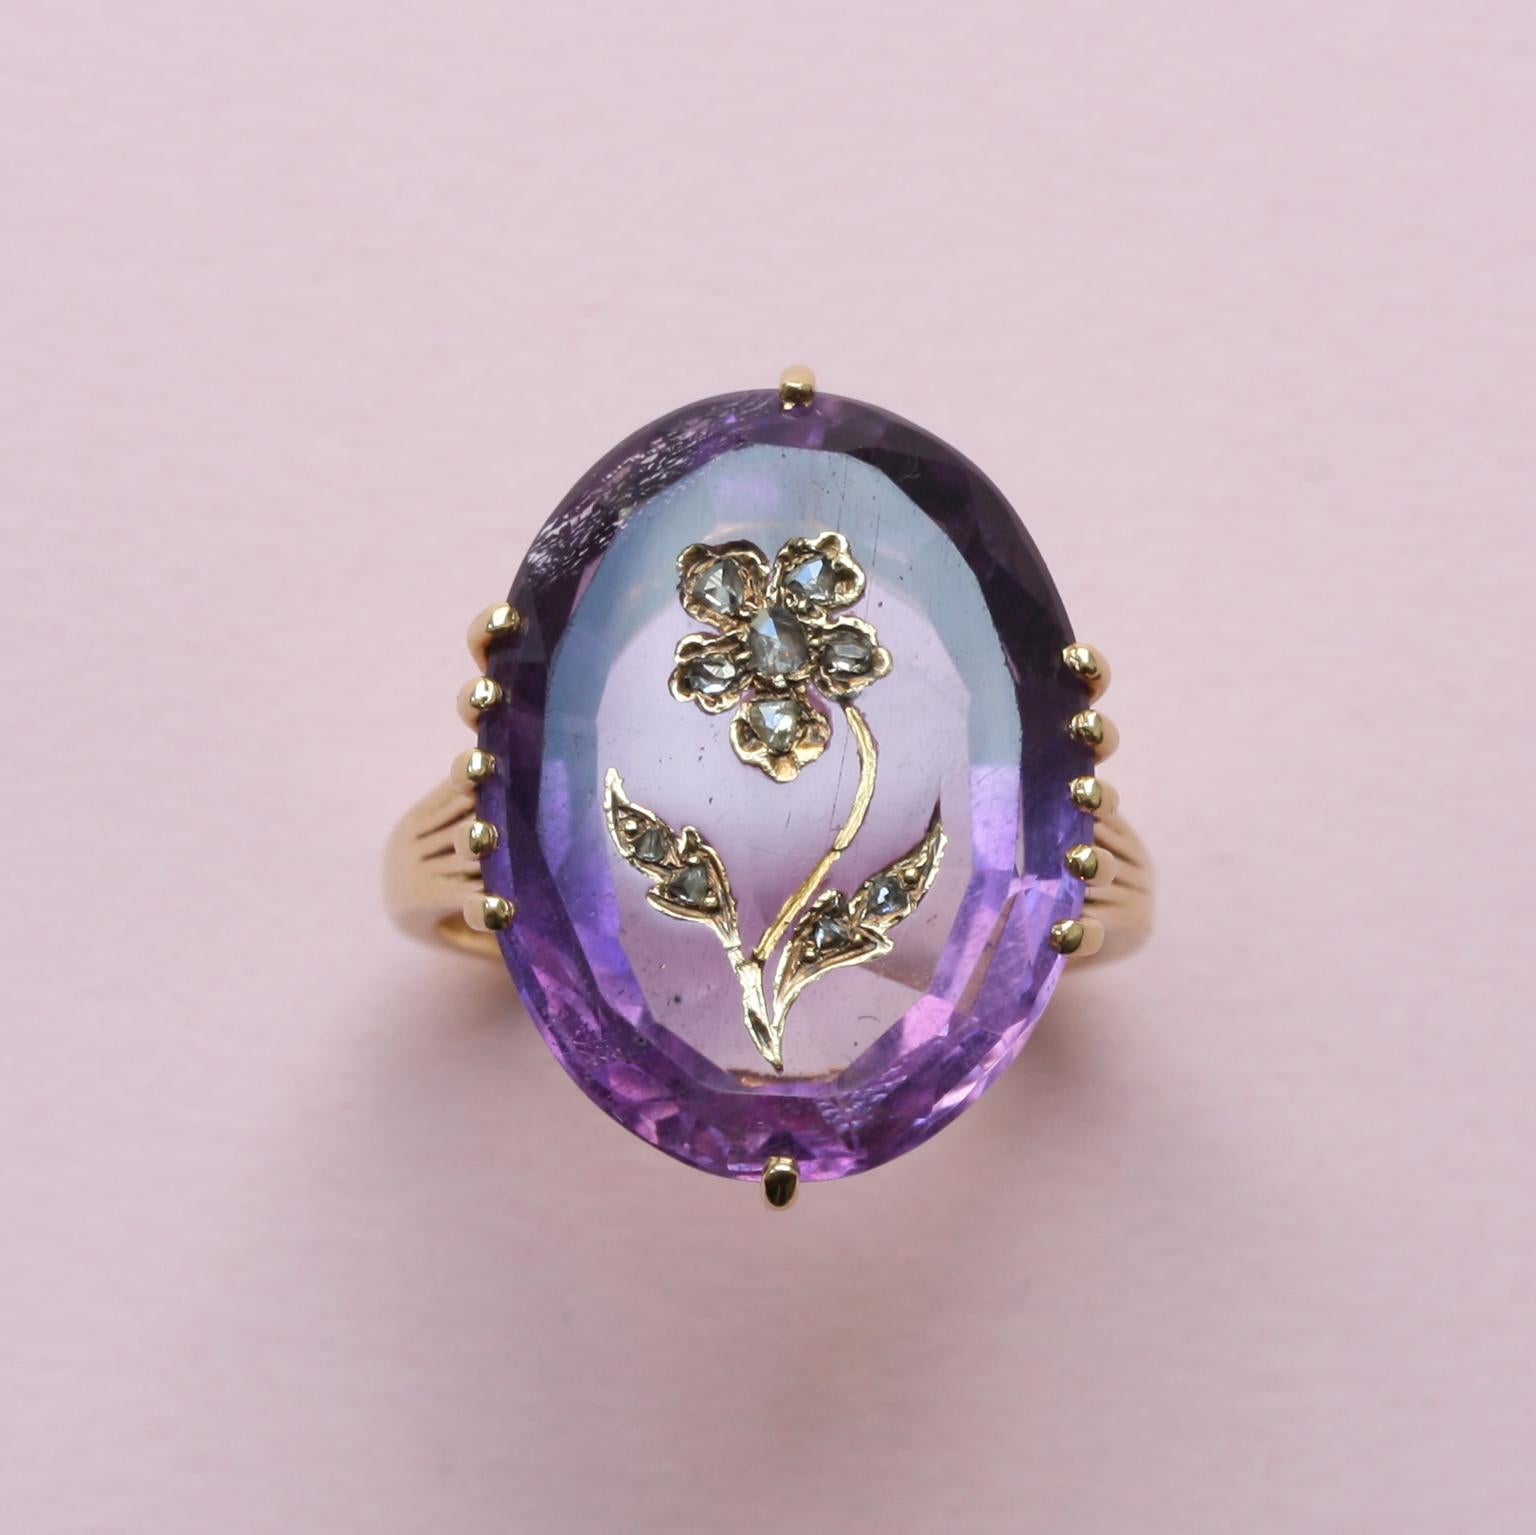 An 18 carat gold ring set with a large oval facetted amethyst that is decorated with a flower or pansy encrusted in gold with rose cut diamonds, France circa 1910.